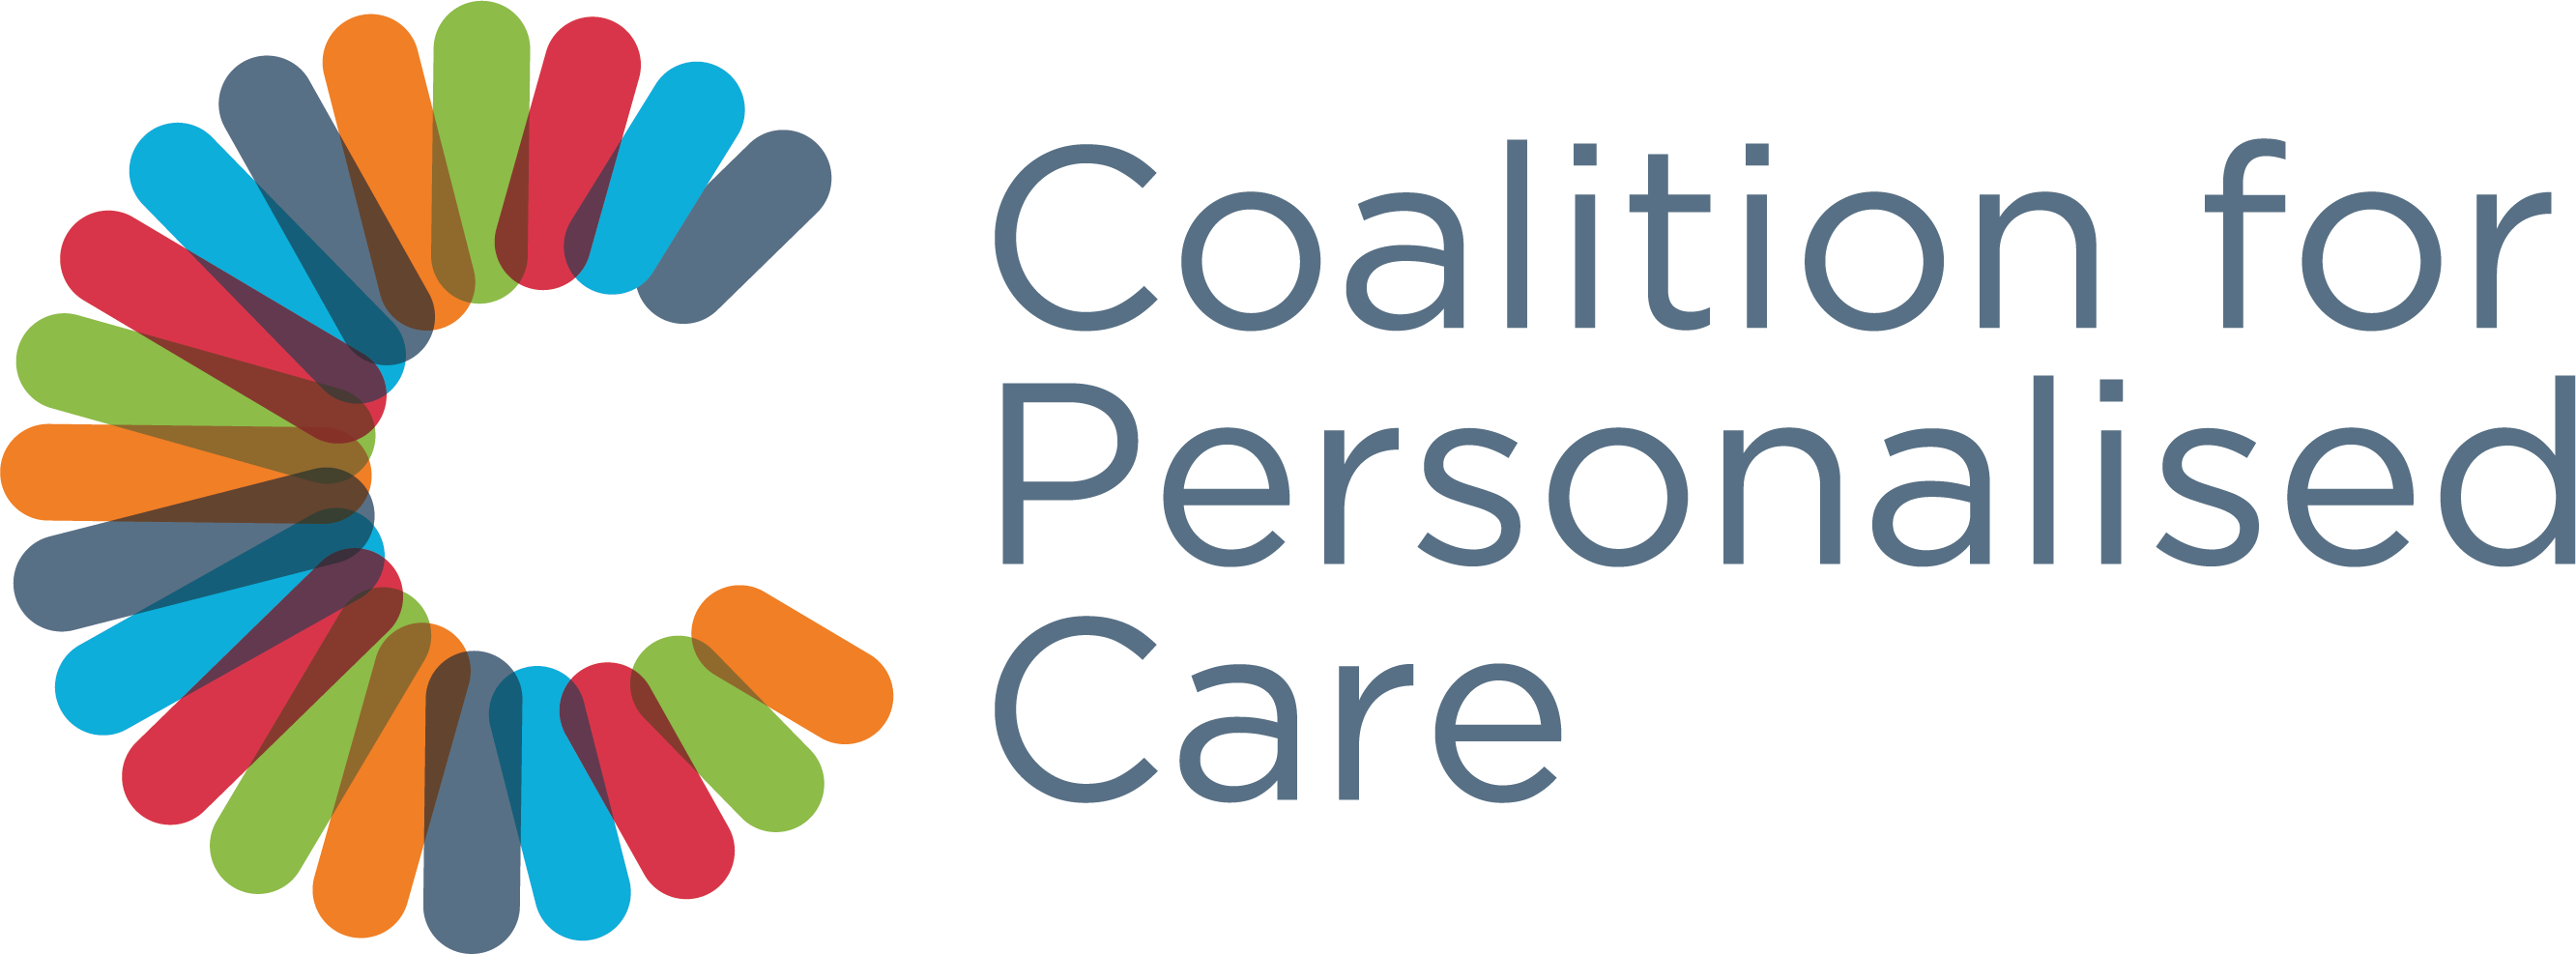 Leadership for Personalised Care National Gathering and Conference | Coalition for Personalised Care